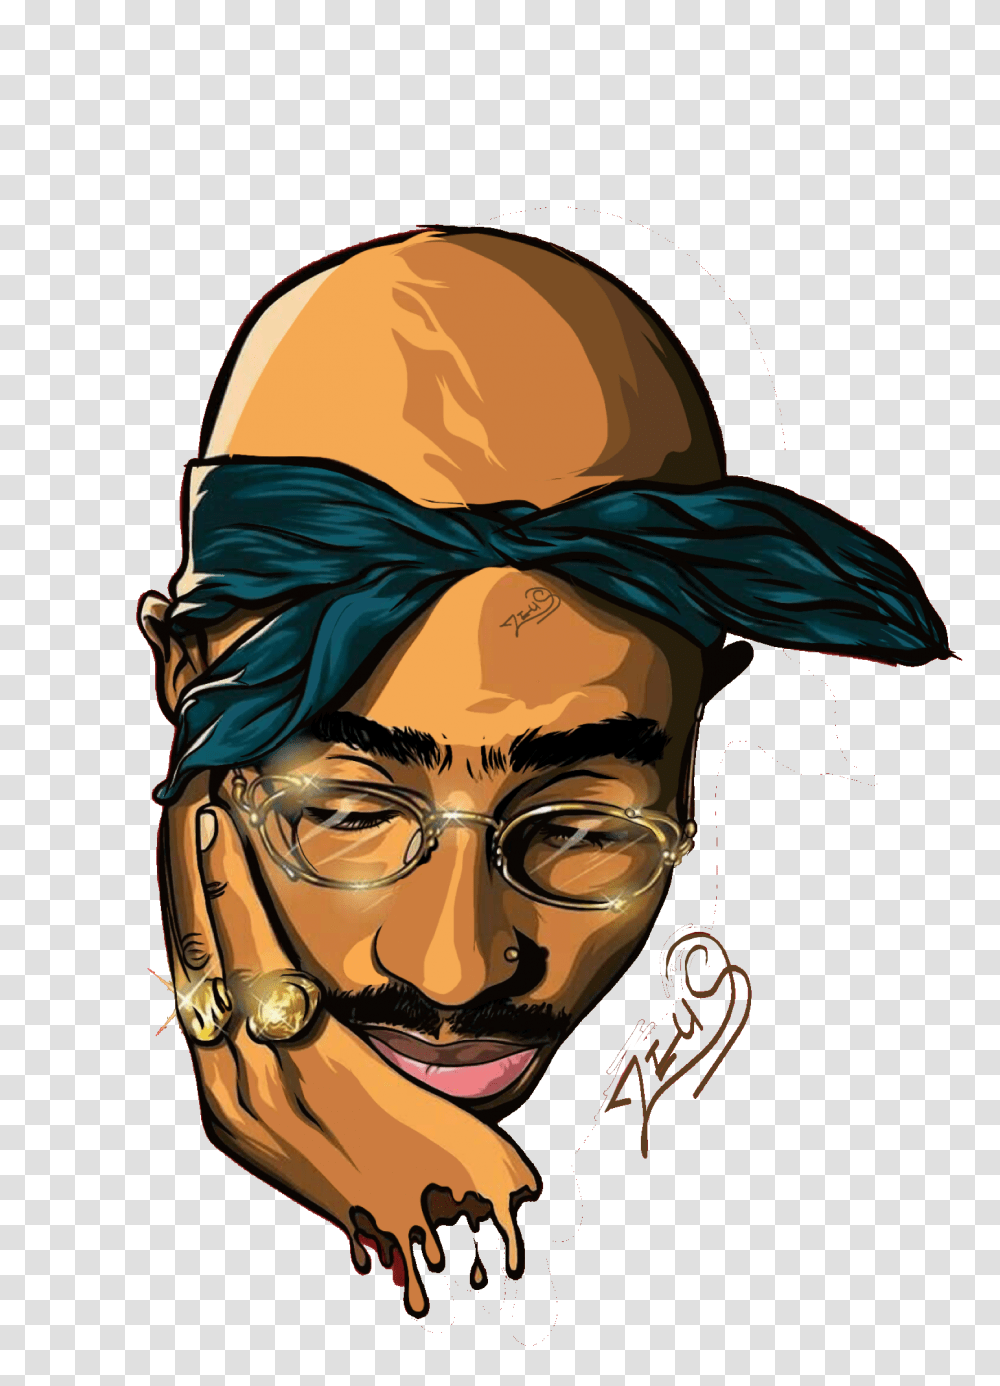 Tupac Shakur Image Free Download, Face, Person, Human, Head Transparent Png